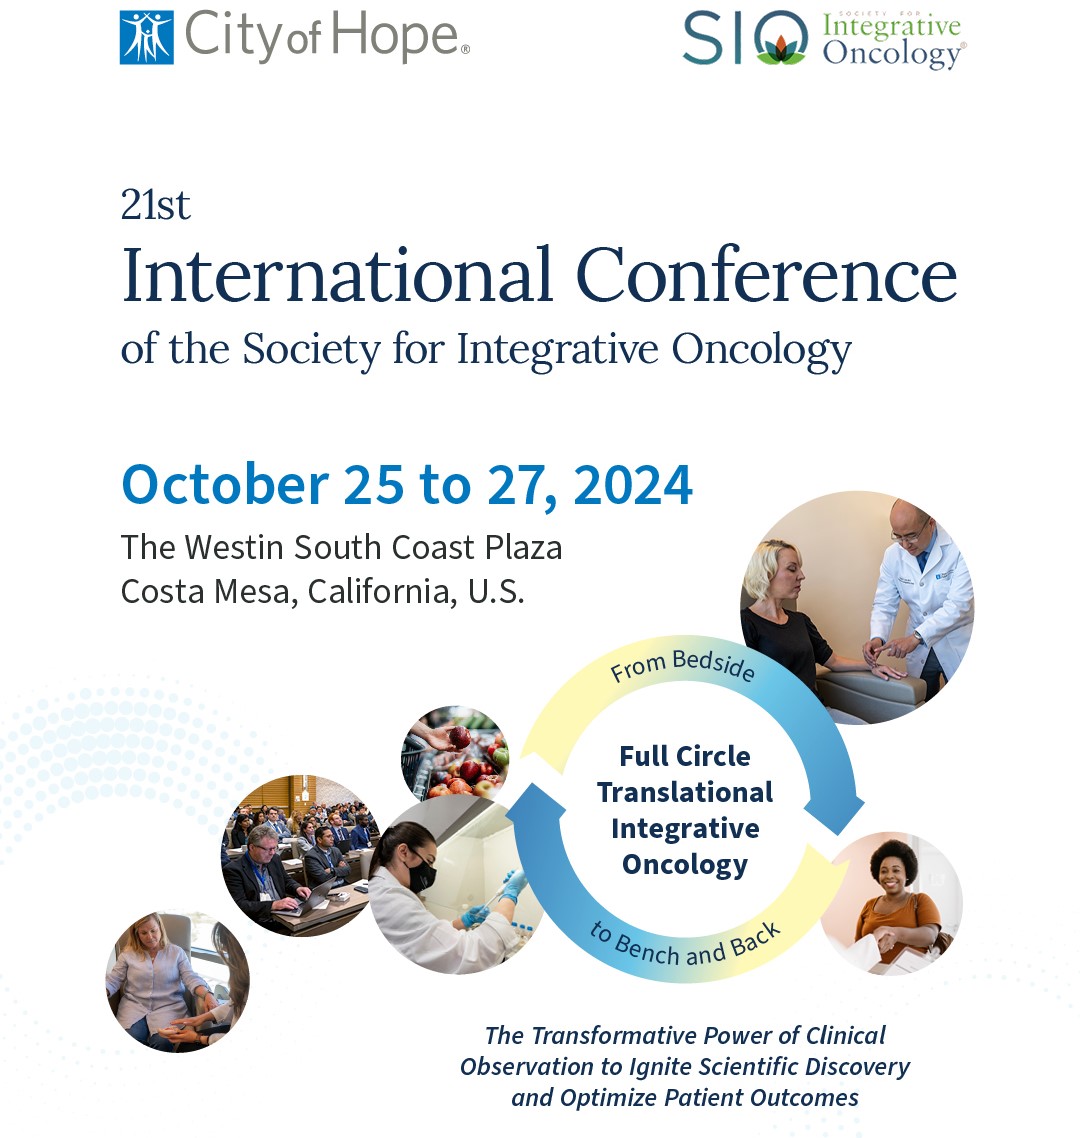 21st International Conference of the Society for Integrative Oncology